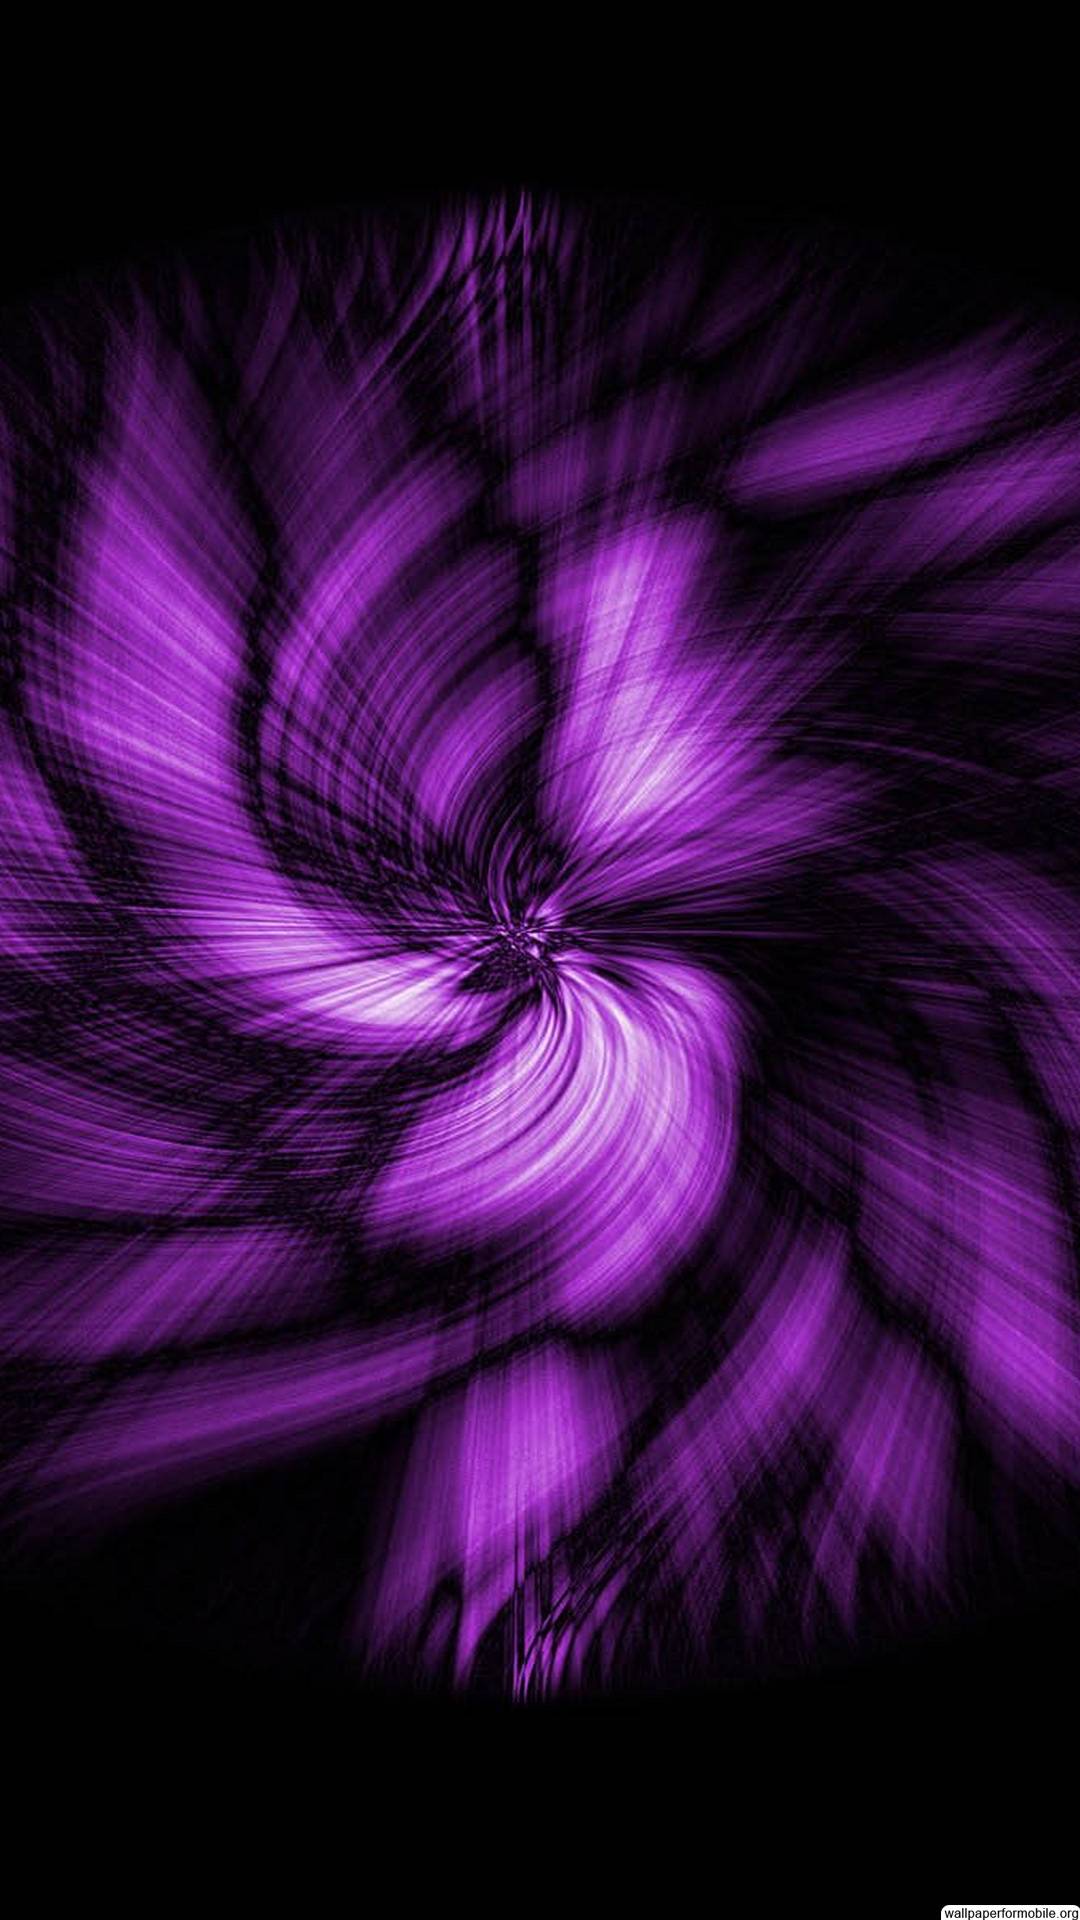 Black and Purple Abstract Wallpapers Top Free Black and